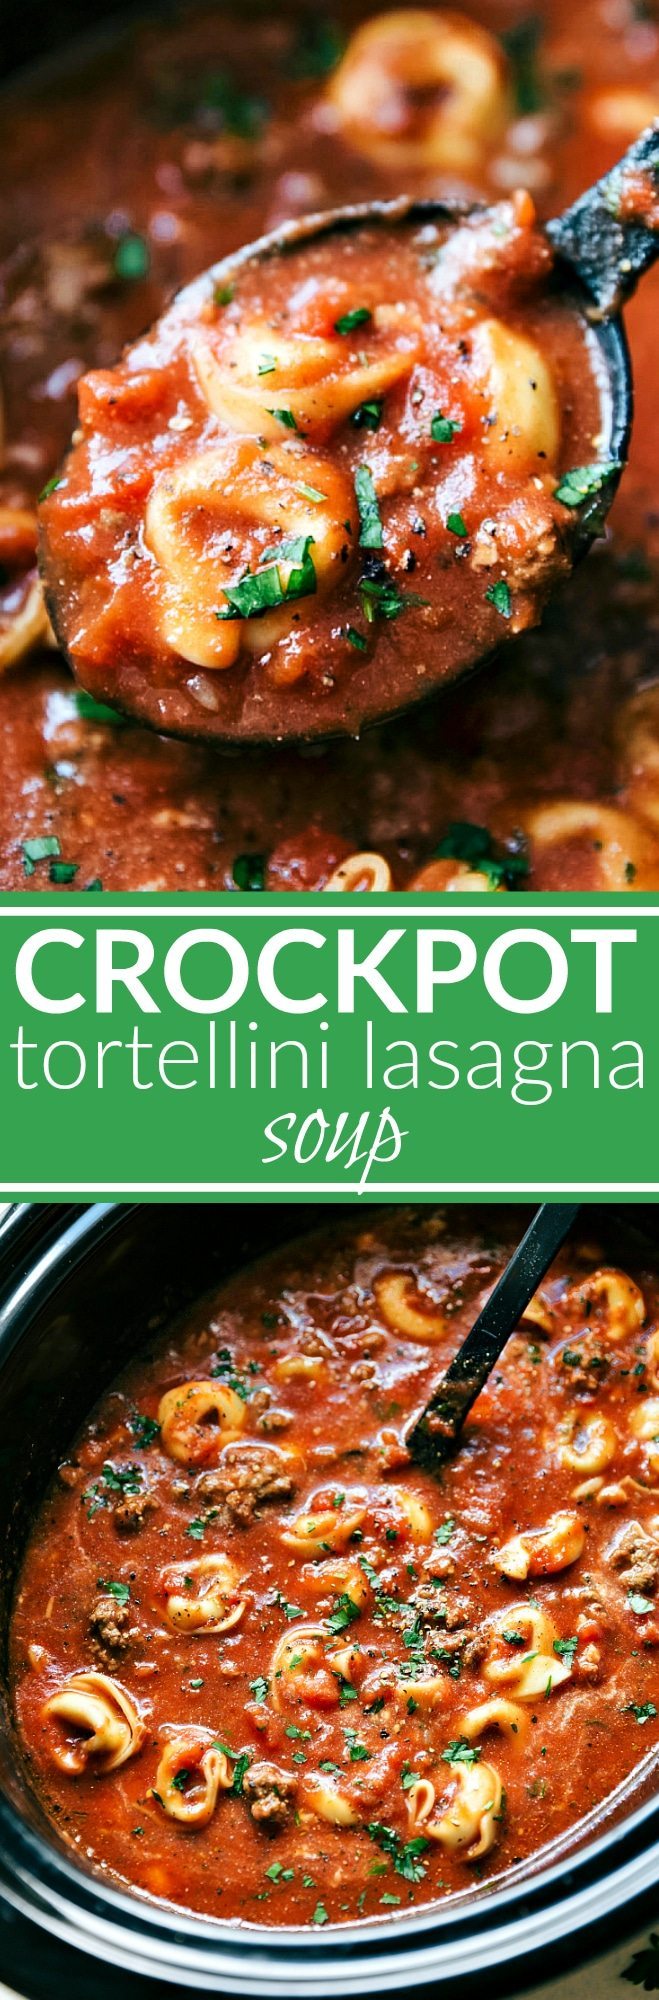 SLOW COOKER TORTELLINI LASAGNA! A crockpot lasagna soup made with cheese-filled tortellini. This soup is simple to make, tastes just like lasagna in soup form, and is a sure crowd pleaser! via chelseasmessyapron.com